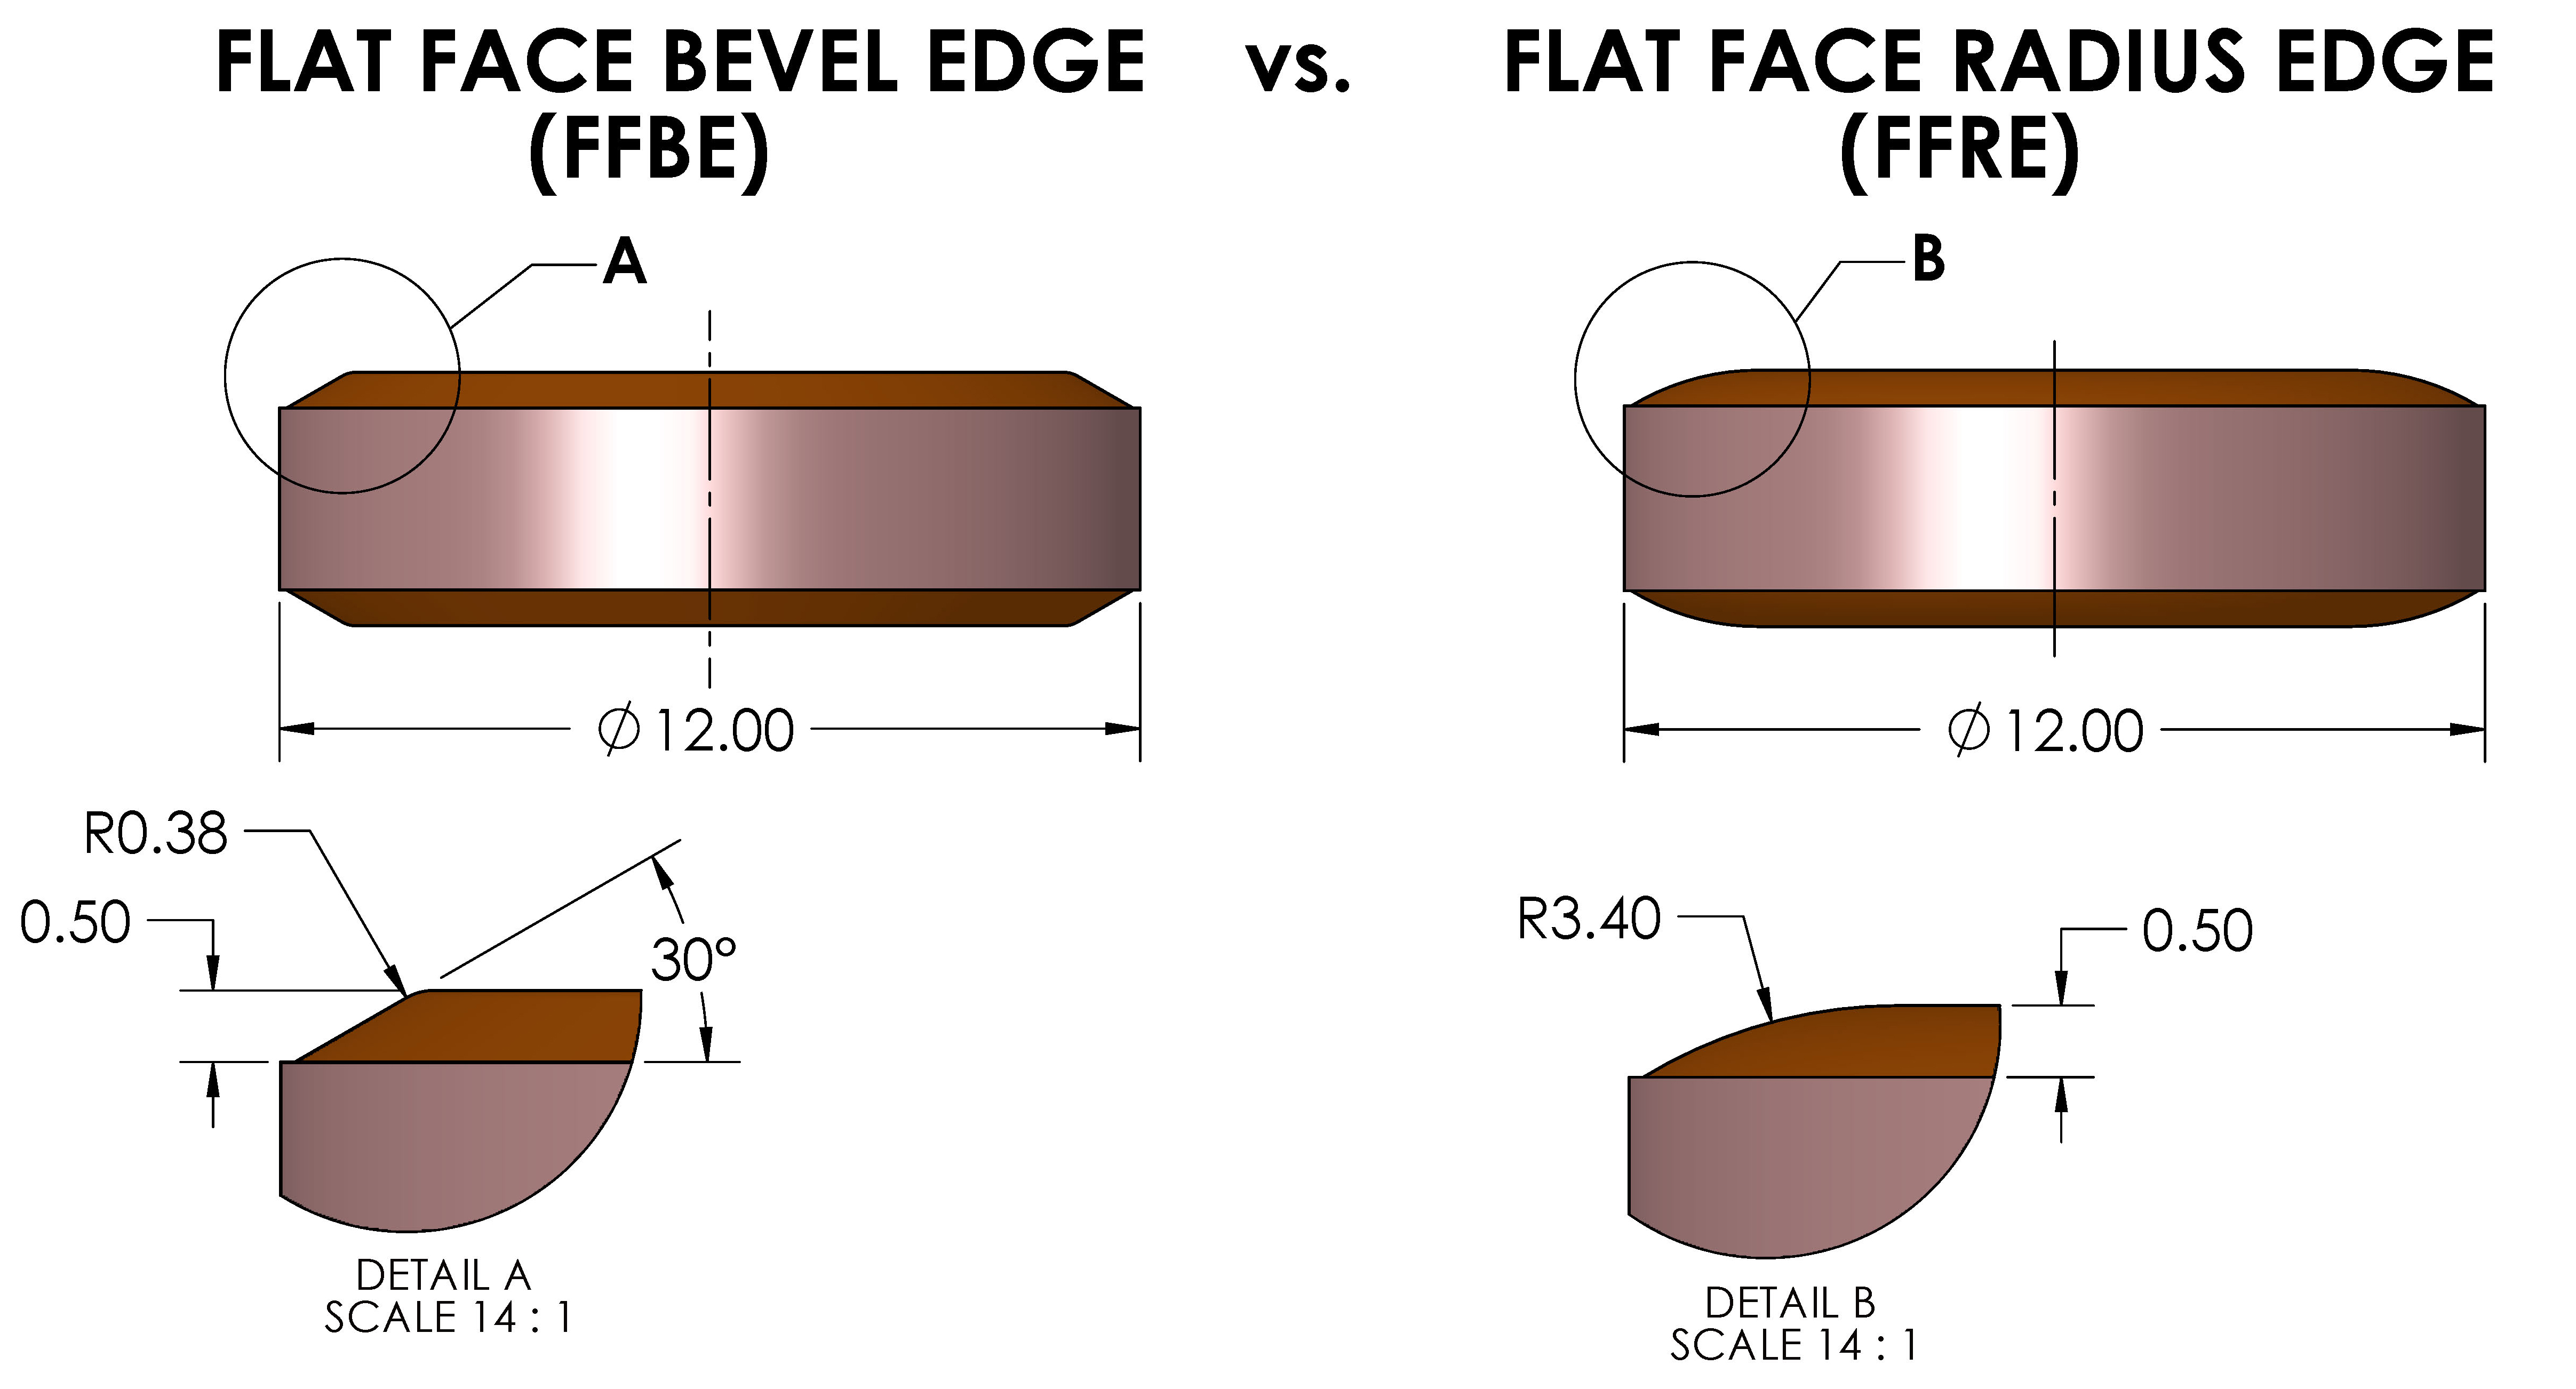 Figure 1: The FFRE tablet design offers smoother edges than the FFBE design, providing greater consumer acceptance